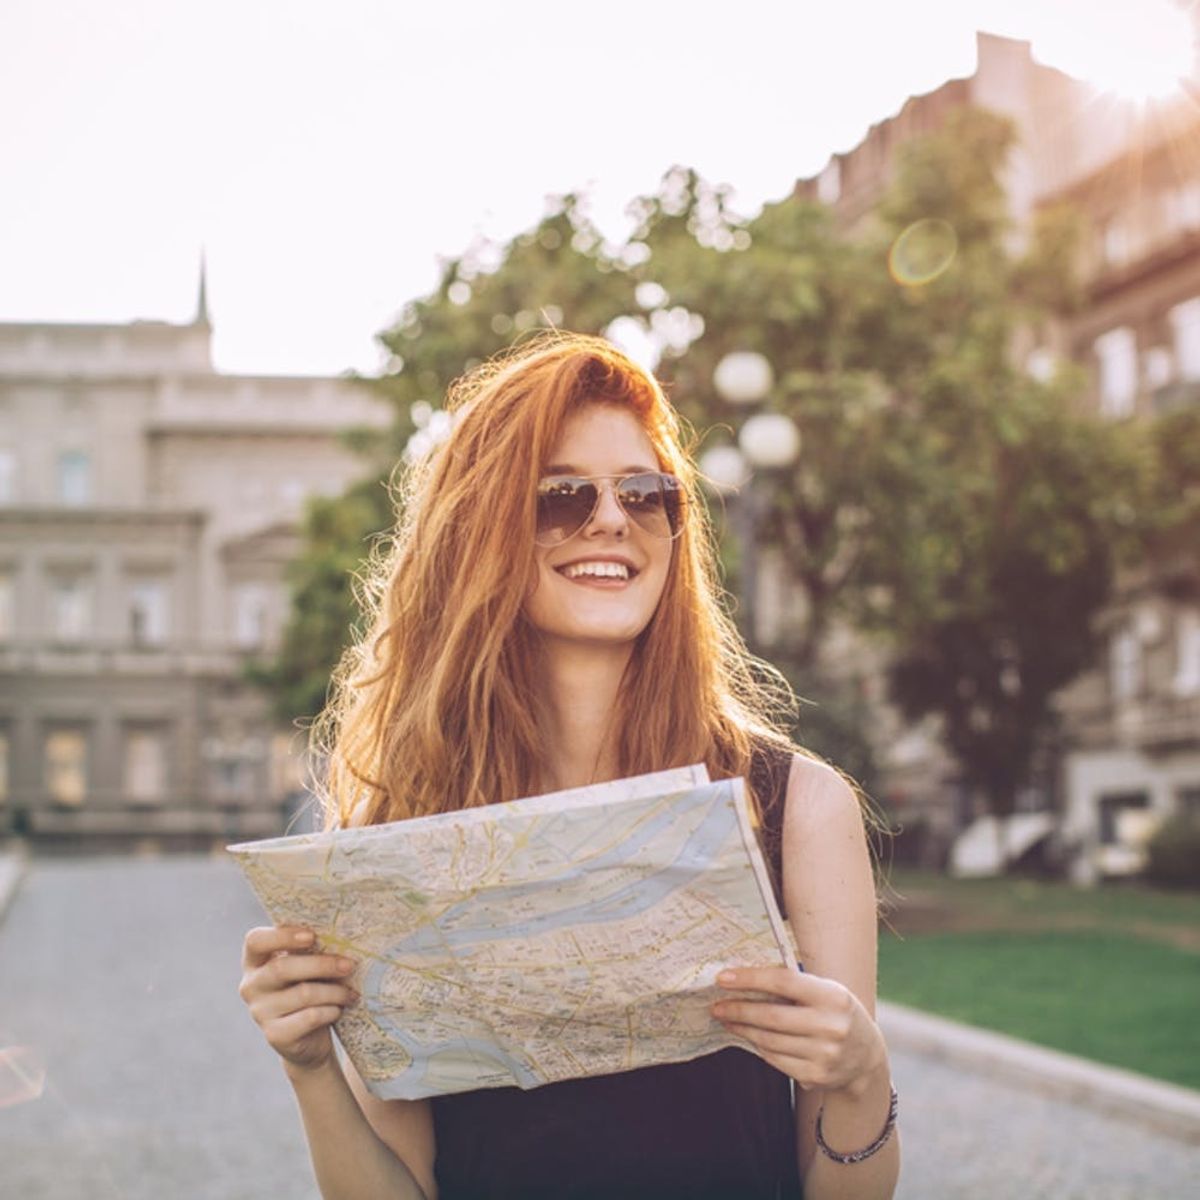 7 Life-Changing Lessons You’ll Learn from Traveling Solo